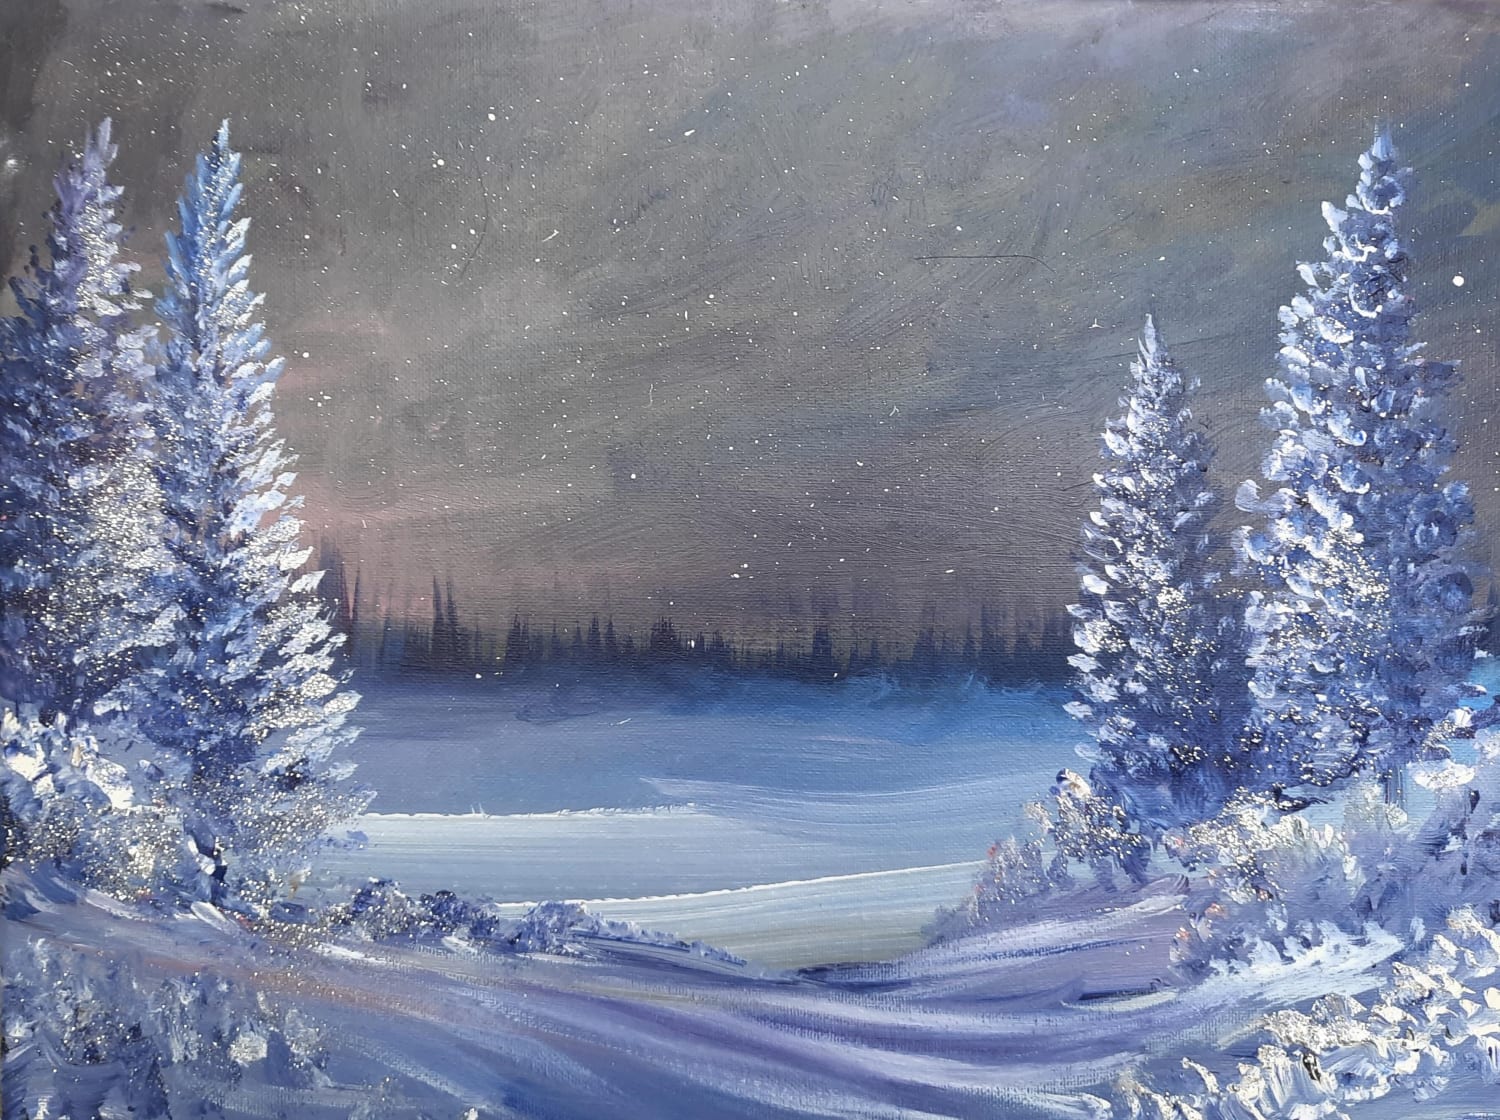 A peaceful winter scene I painted today! Acrylic on canvas.